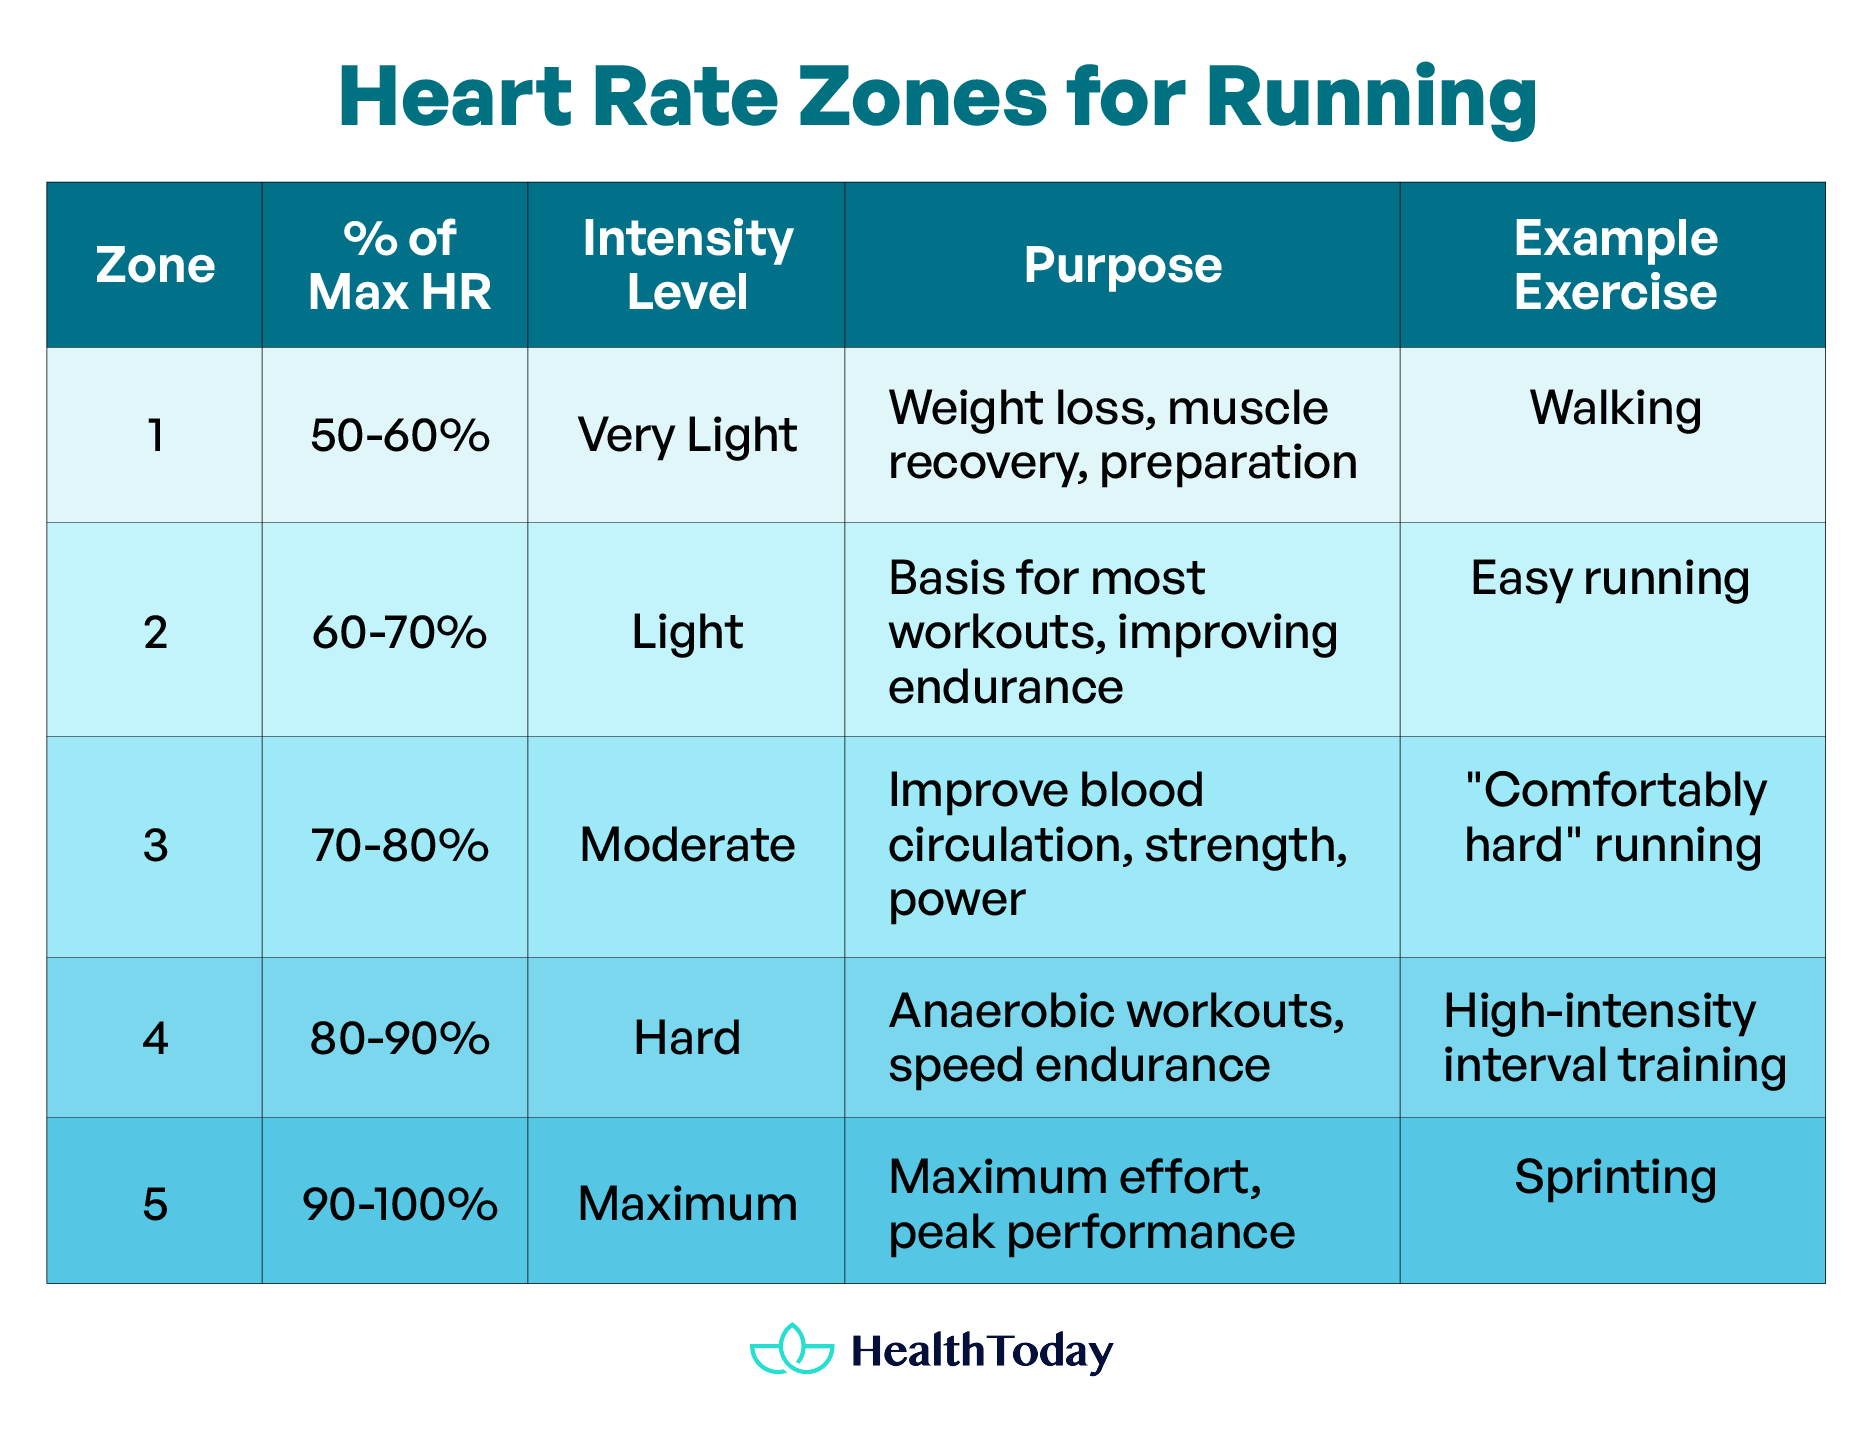 Average Heart Rate While Running Normal Heart Rate Heart Rate Zones 03